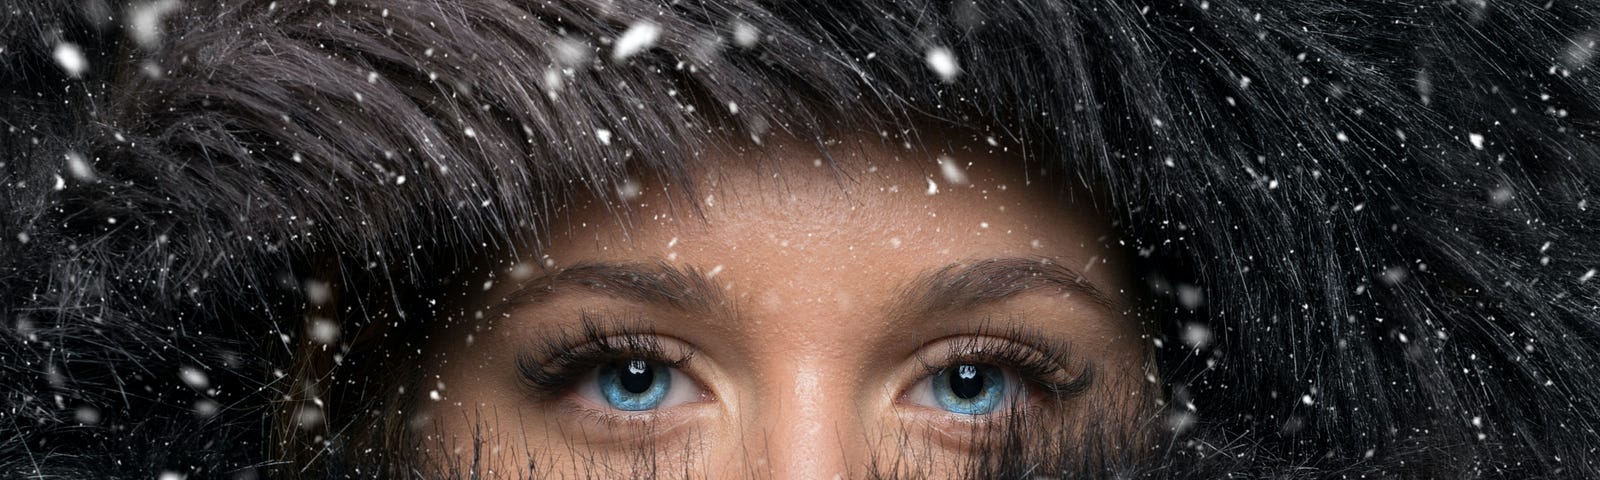 a blue-eyed woman wrapped in fur, out in the snow